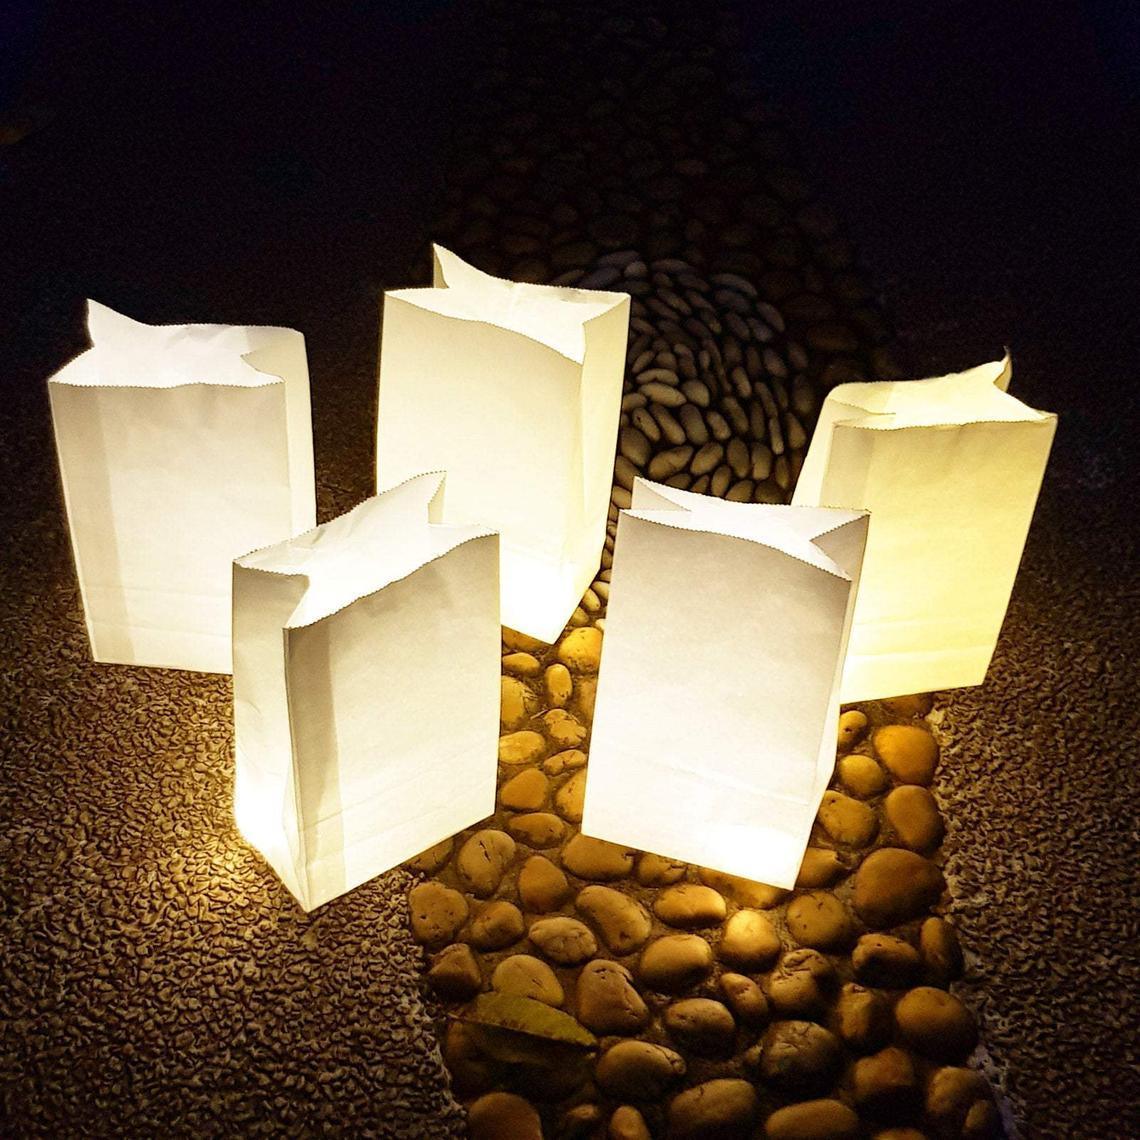 Led Luminaria 50Pcs Light Up Luminaries Warm White Luminary Candle Bags With Lights-For Wedding Aisle, Rustic Wedding Decorations - Decotree.co Online Shop